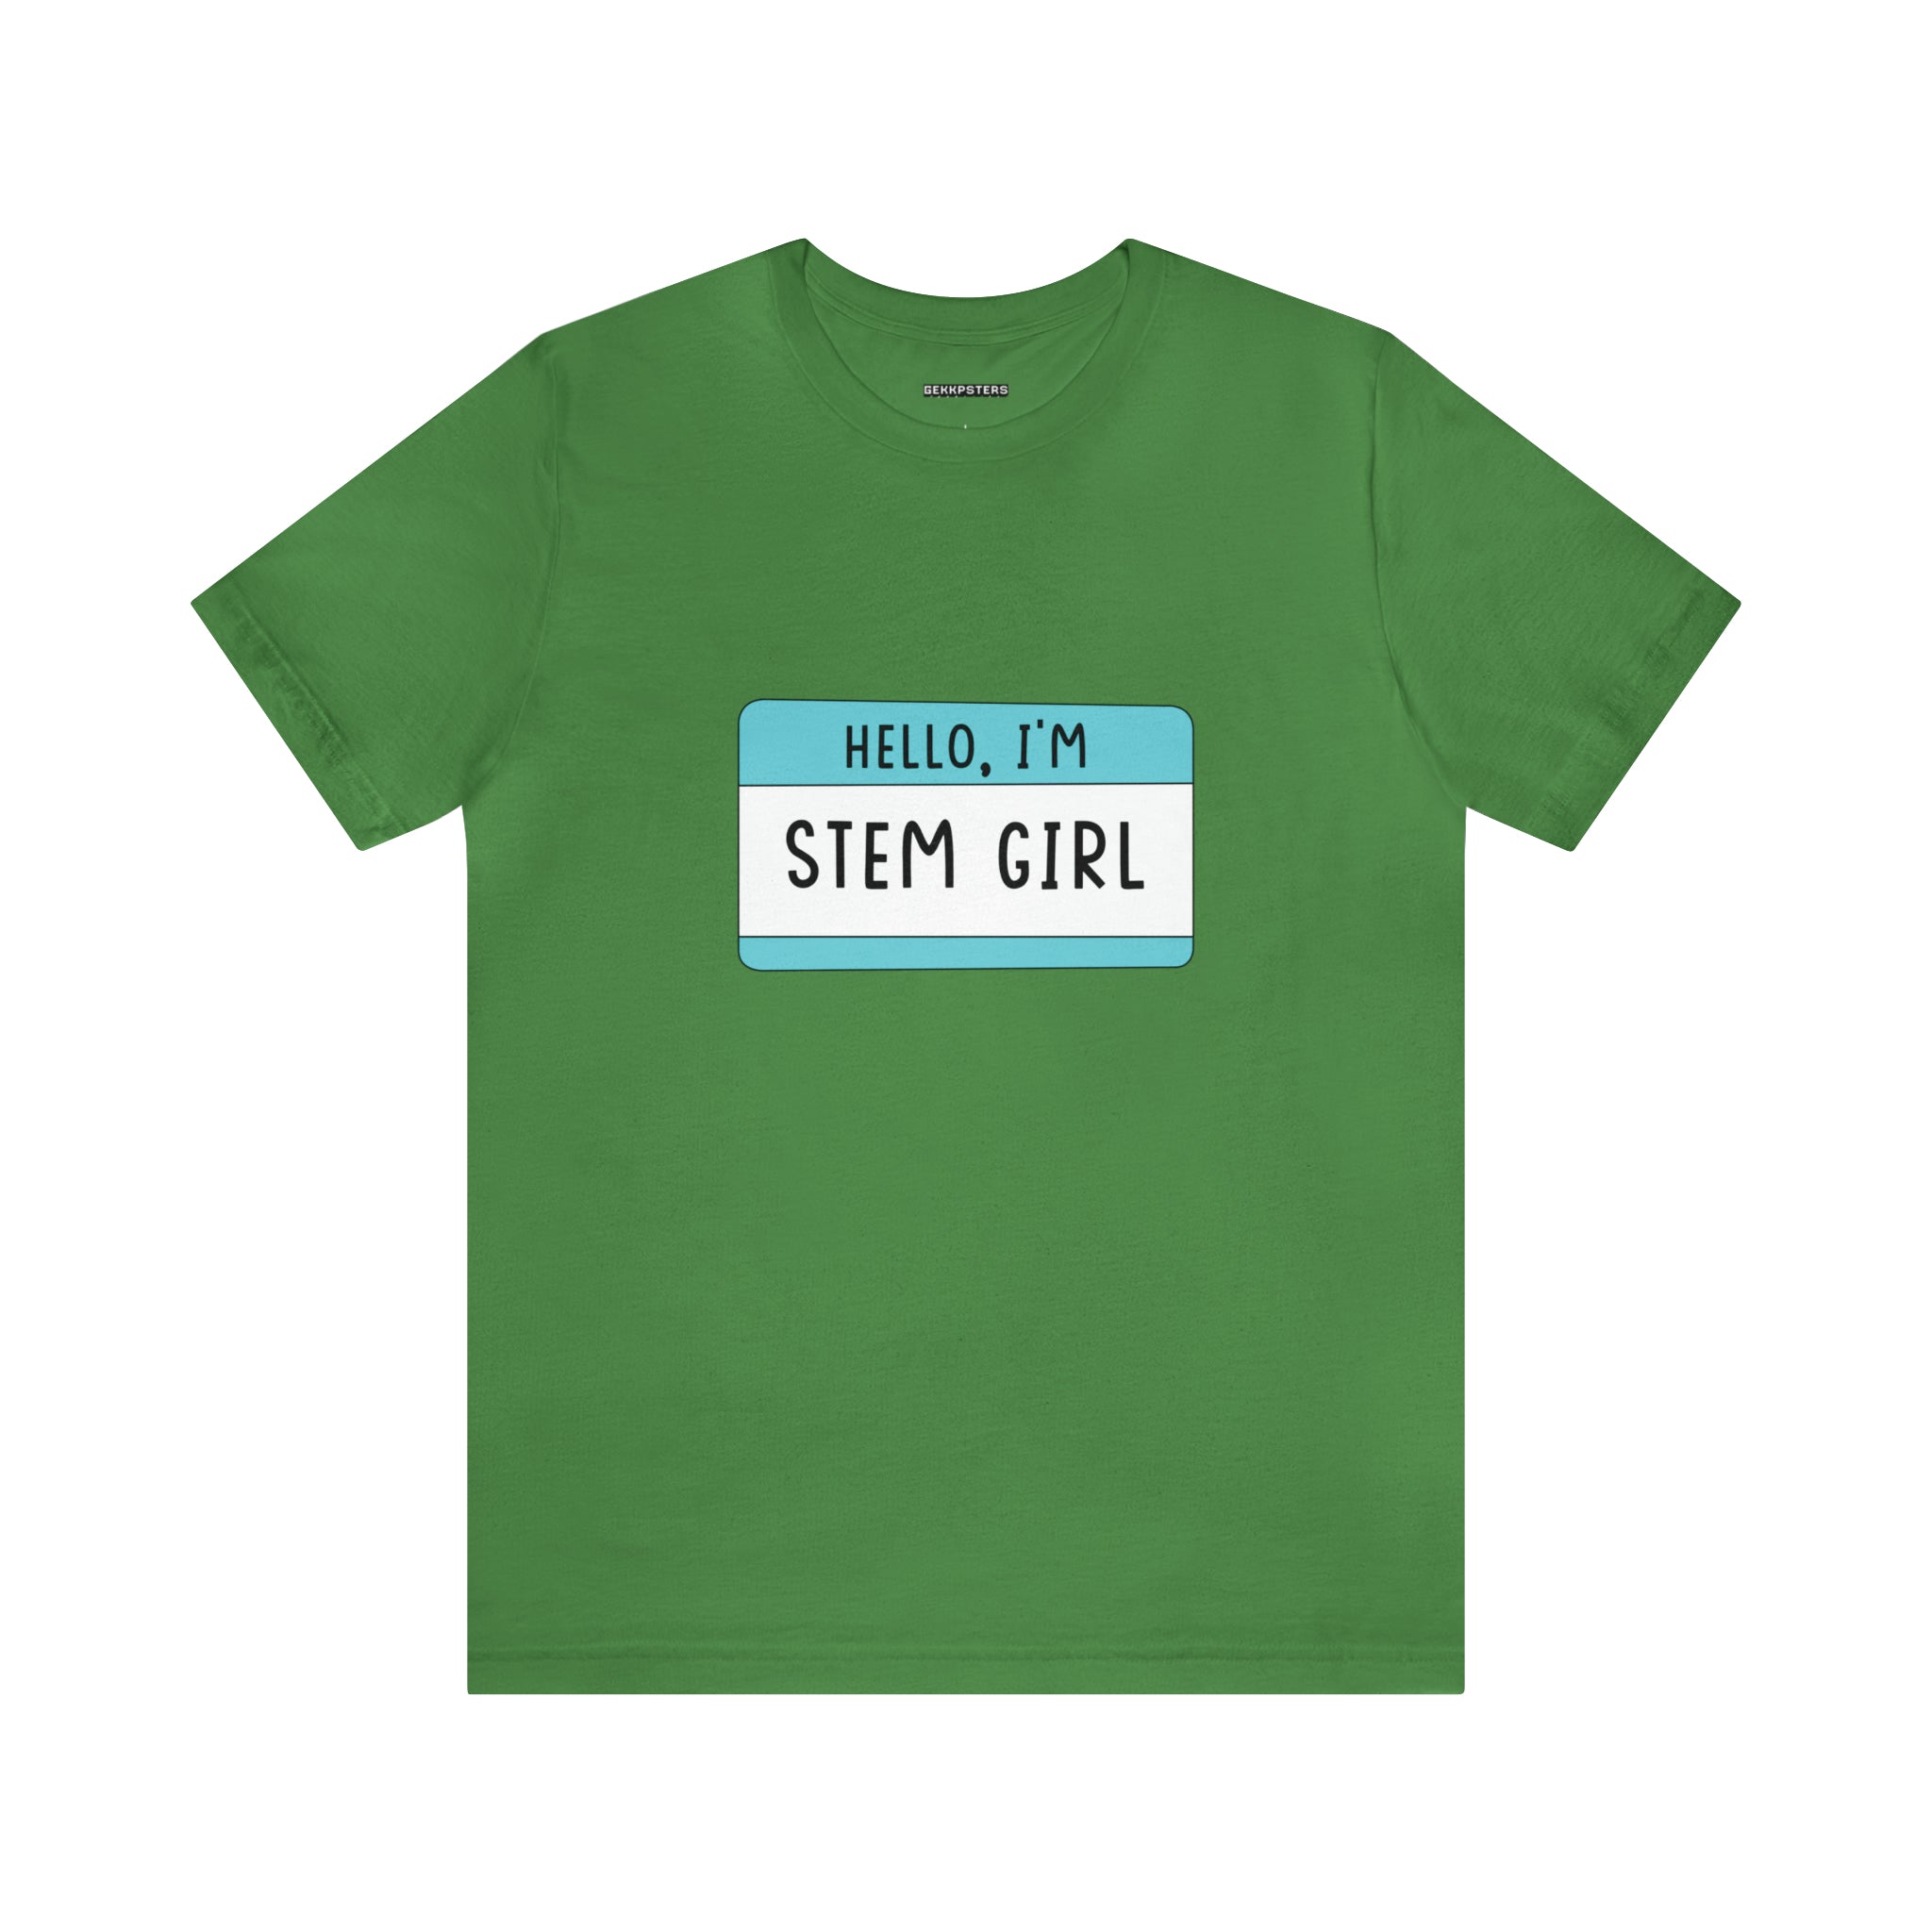 Hello, I'm Stem Girl T-Shirt with a name tag design that reads "hello, I'm STEM Girl" on the chest, designed to inspire curiosity in young minds.